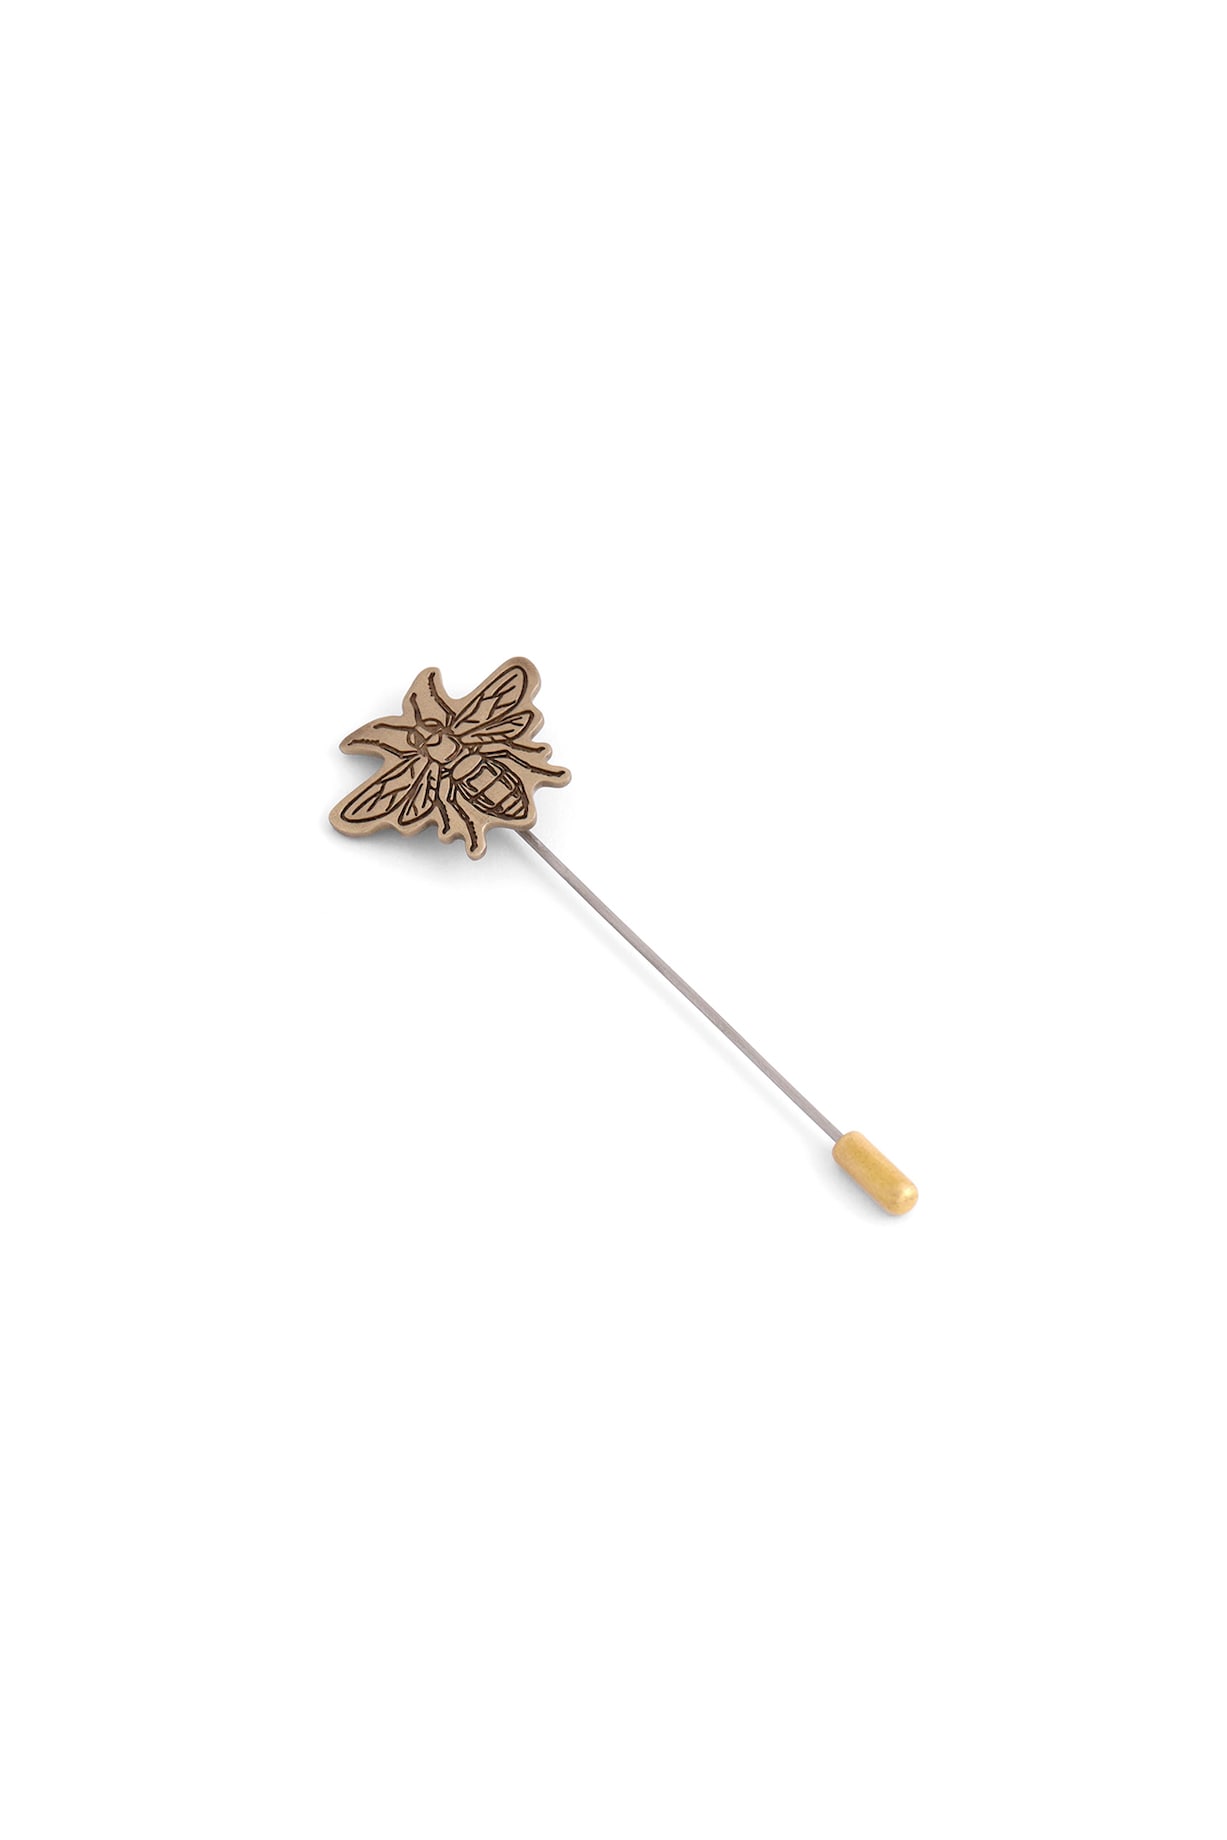 Antique Gold Medieval War Weapon Lapel Pin Design by Cosa Nostraa